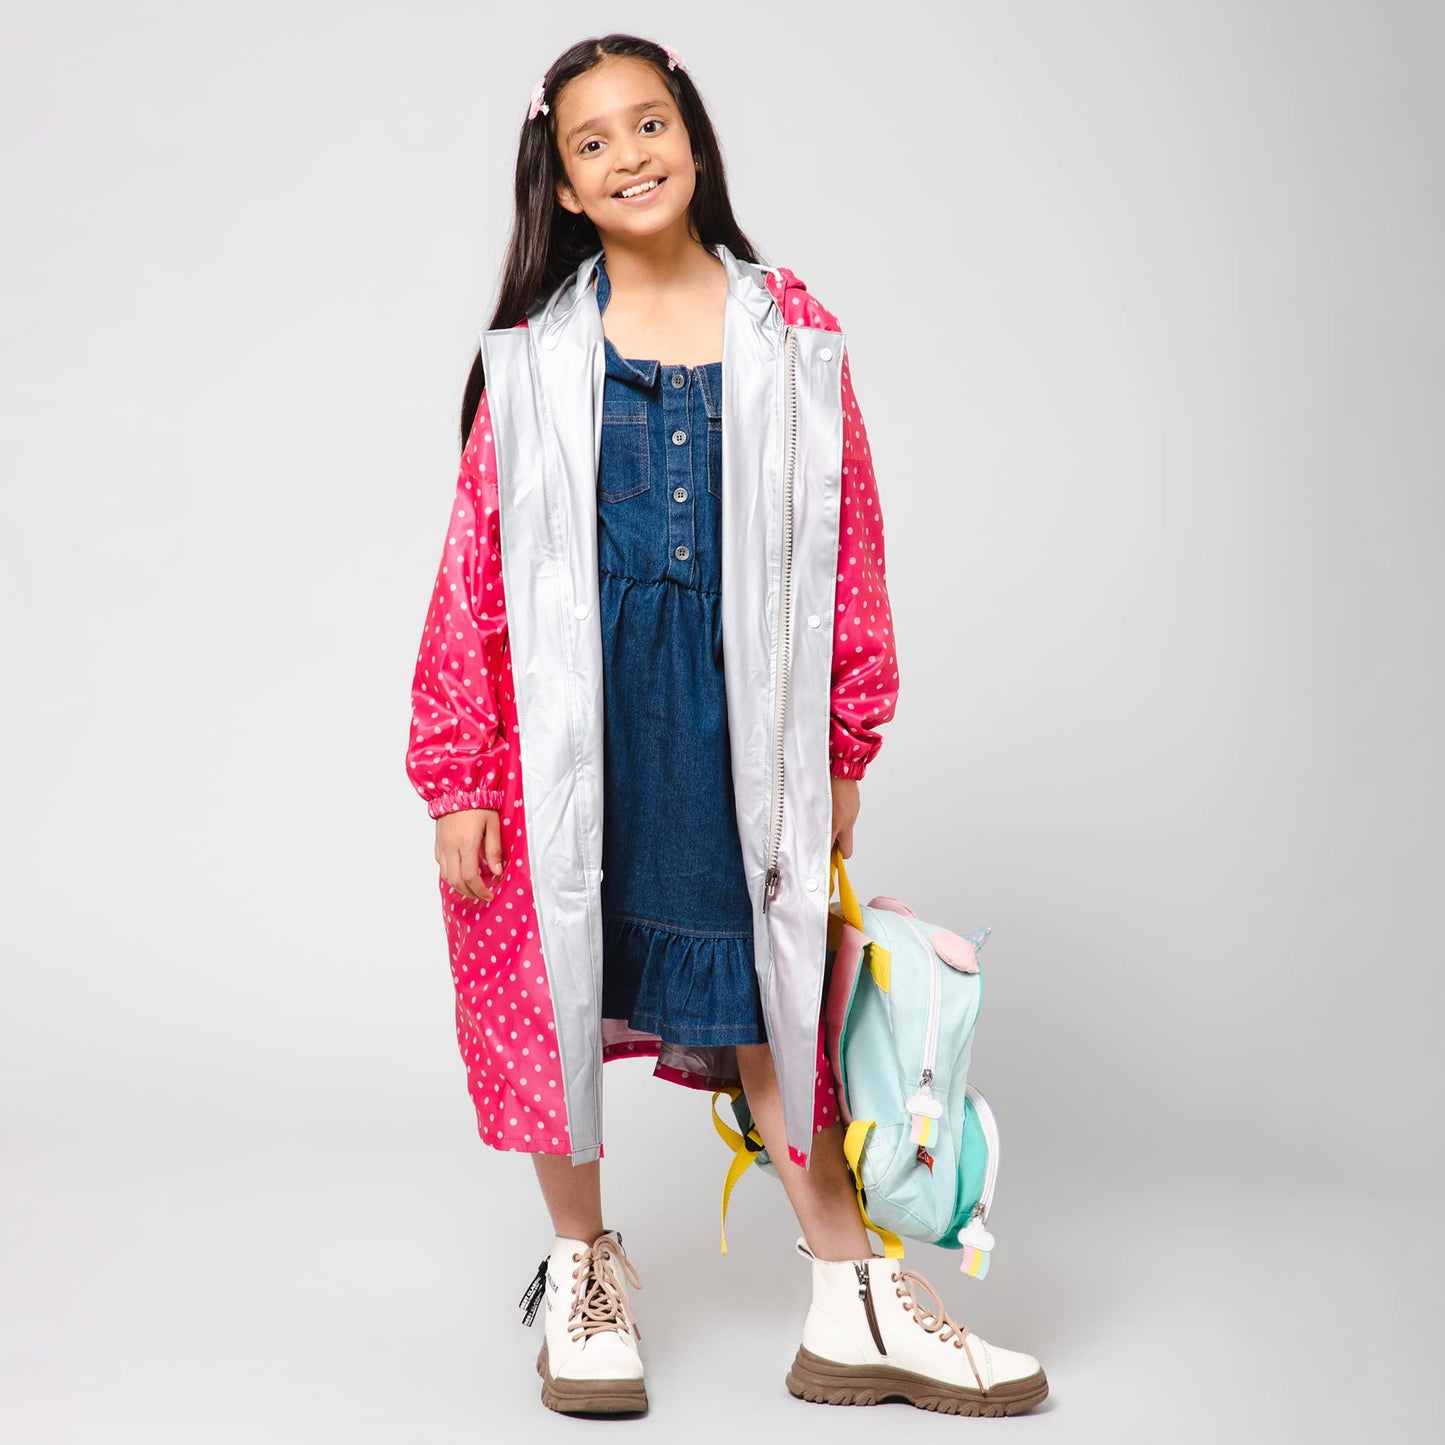 THE CLOWNFISH Drizzle Dot Series Kids Raincoat Waterproof Polyester Double Coating Reversible Longcoat with Hood and Reflector Logo at Back. Printed Plastic Pouch. Kid Age-5-6 years (Bubblegum Pink)